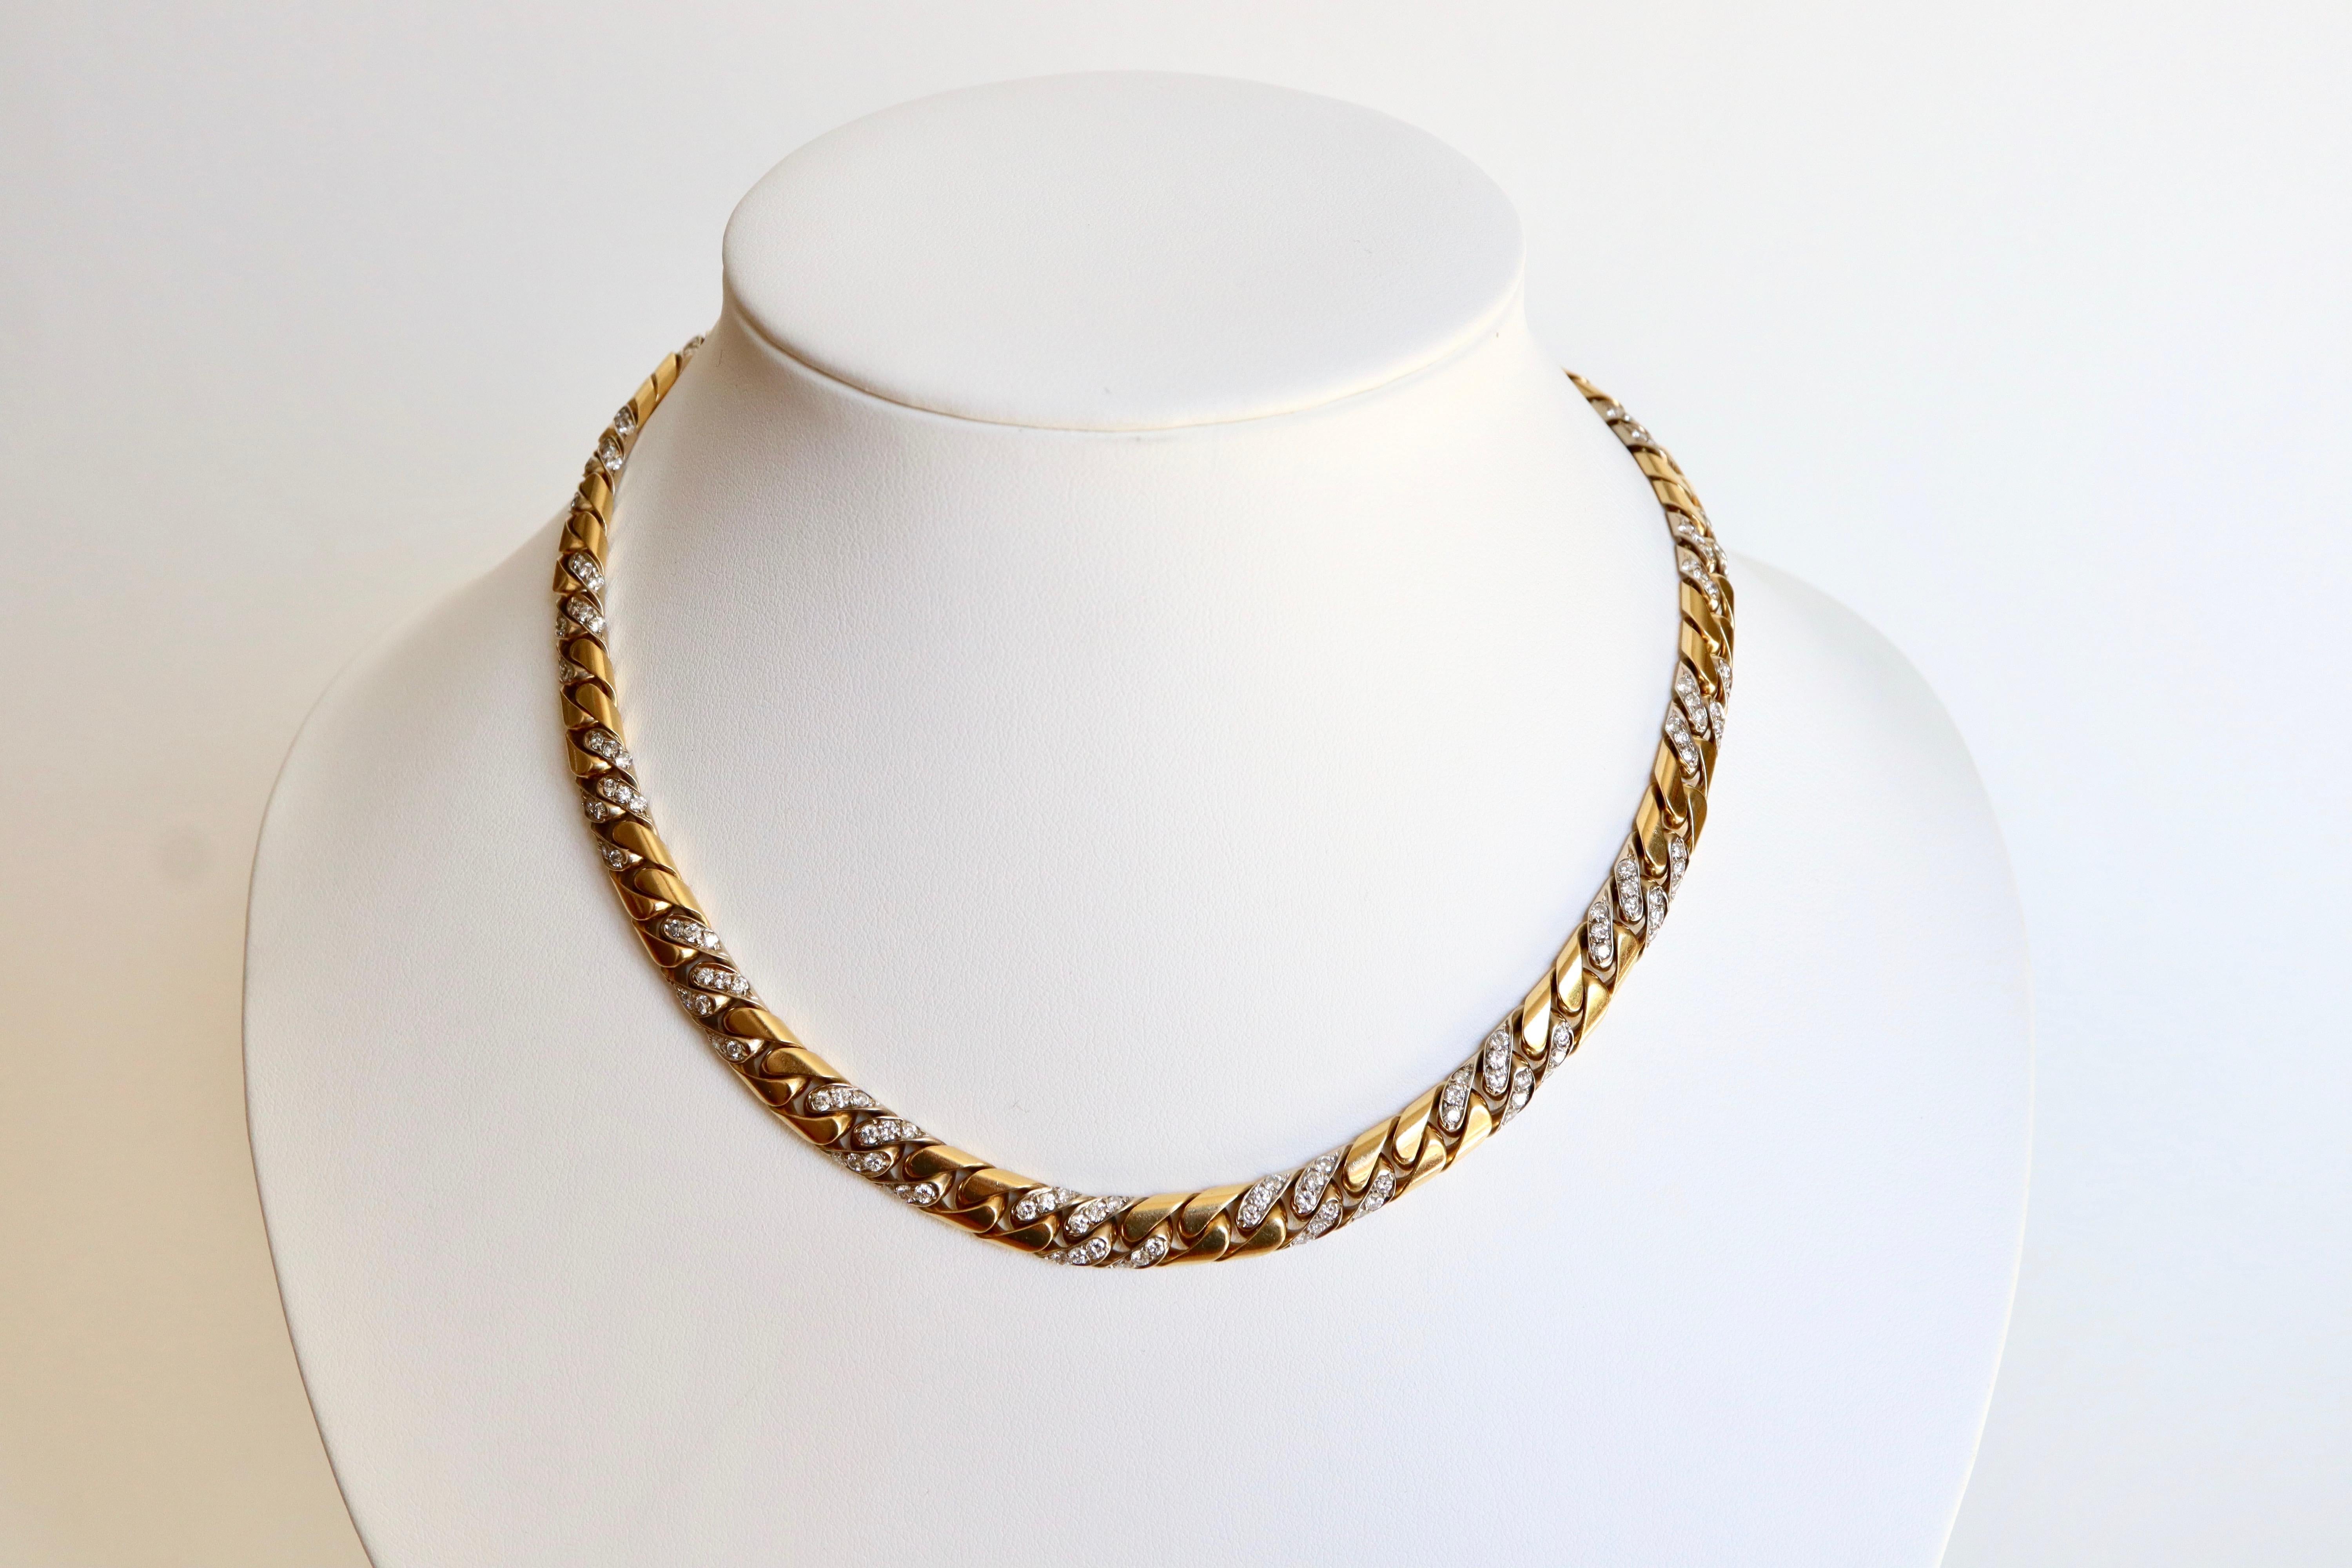 Brilliant Cut Fred Paris Link Gold Necklace with Diamonds Gold and White 18 Carats Gold